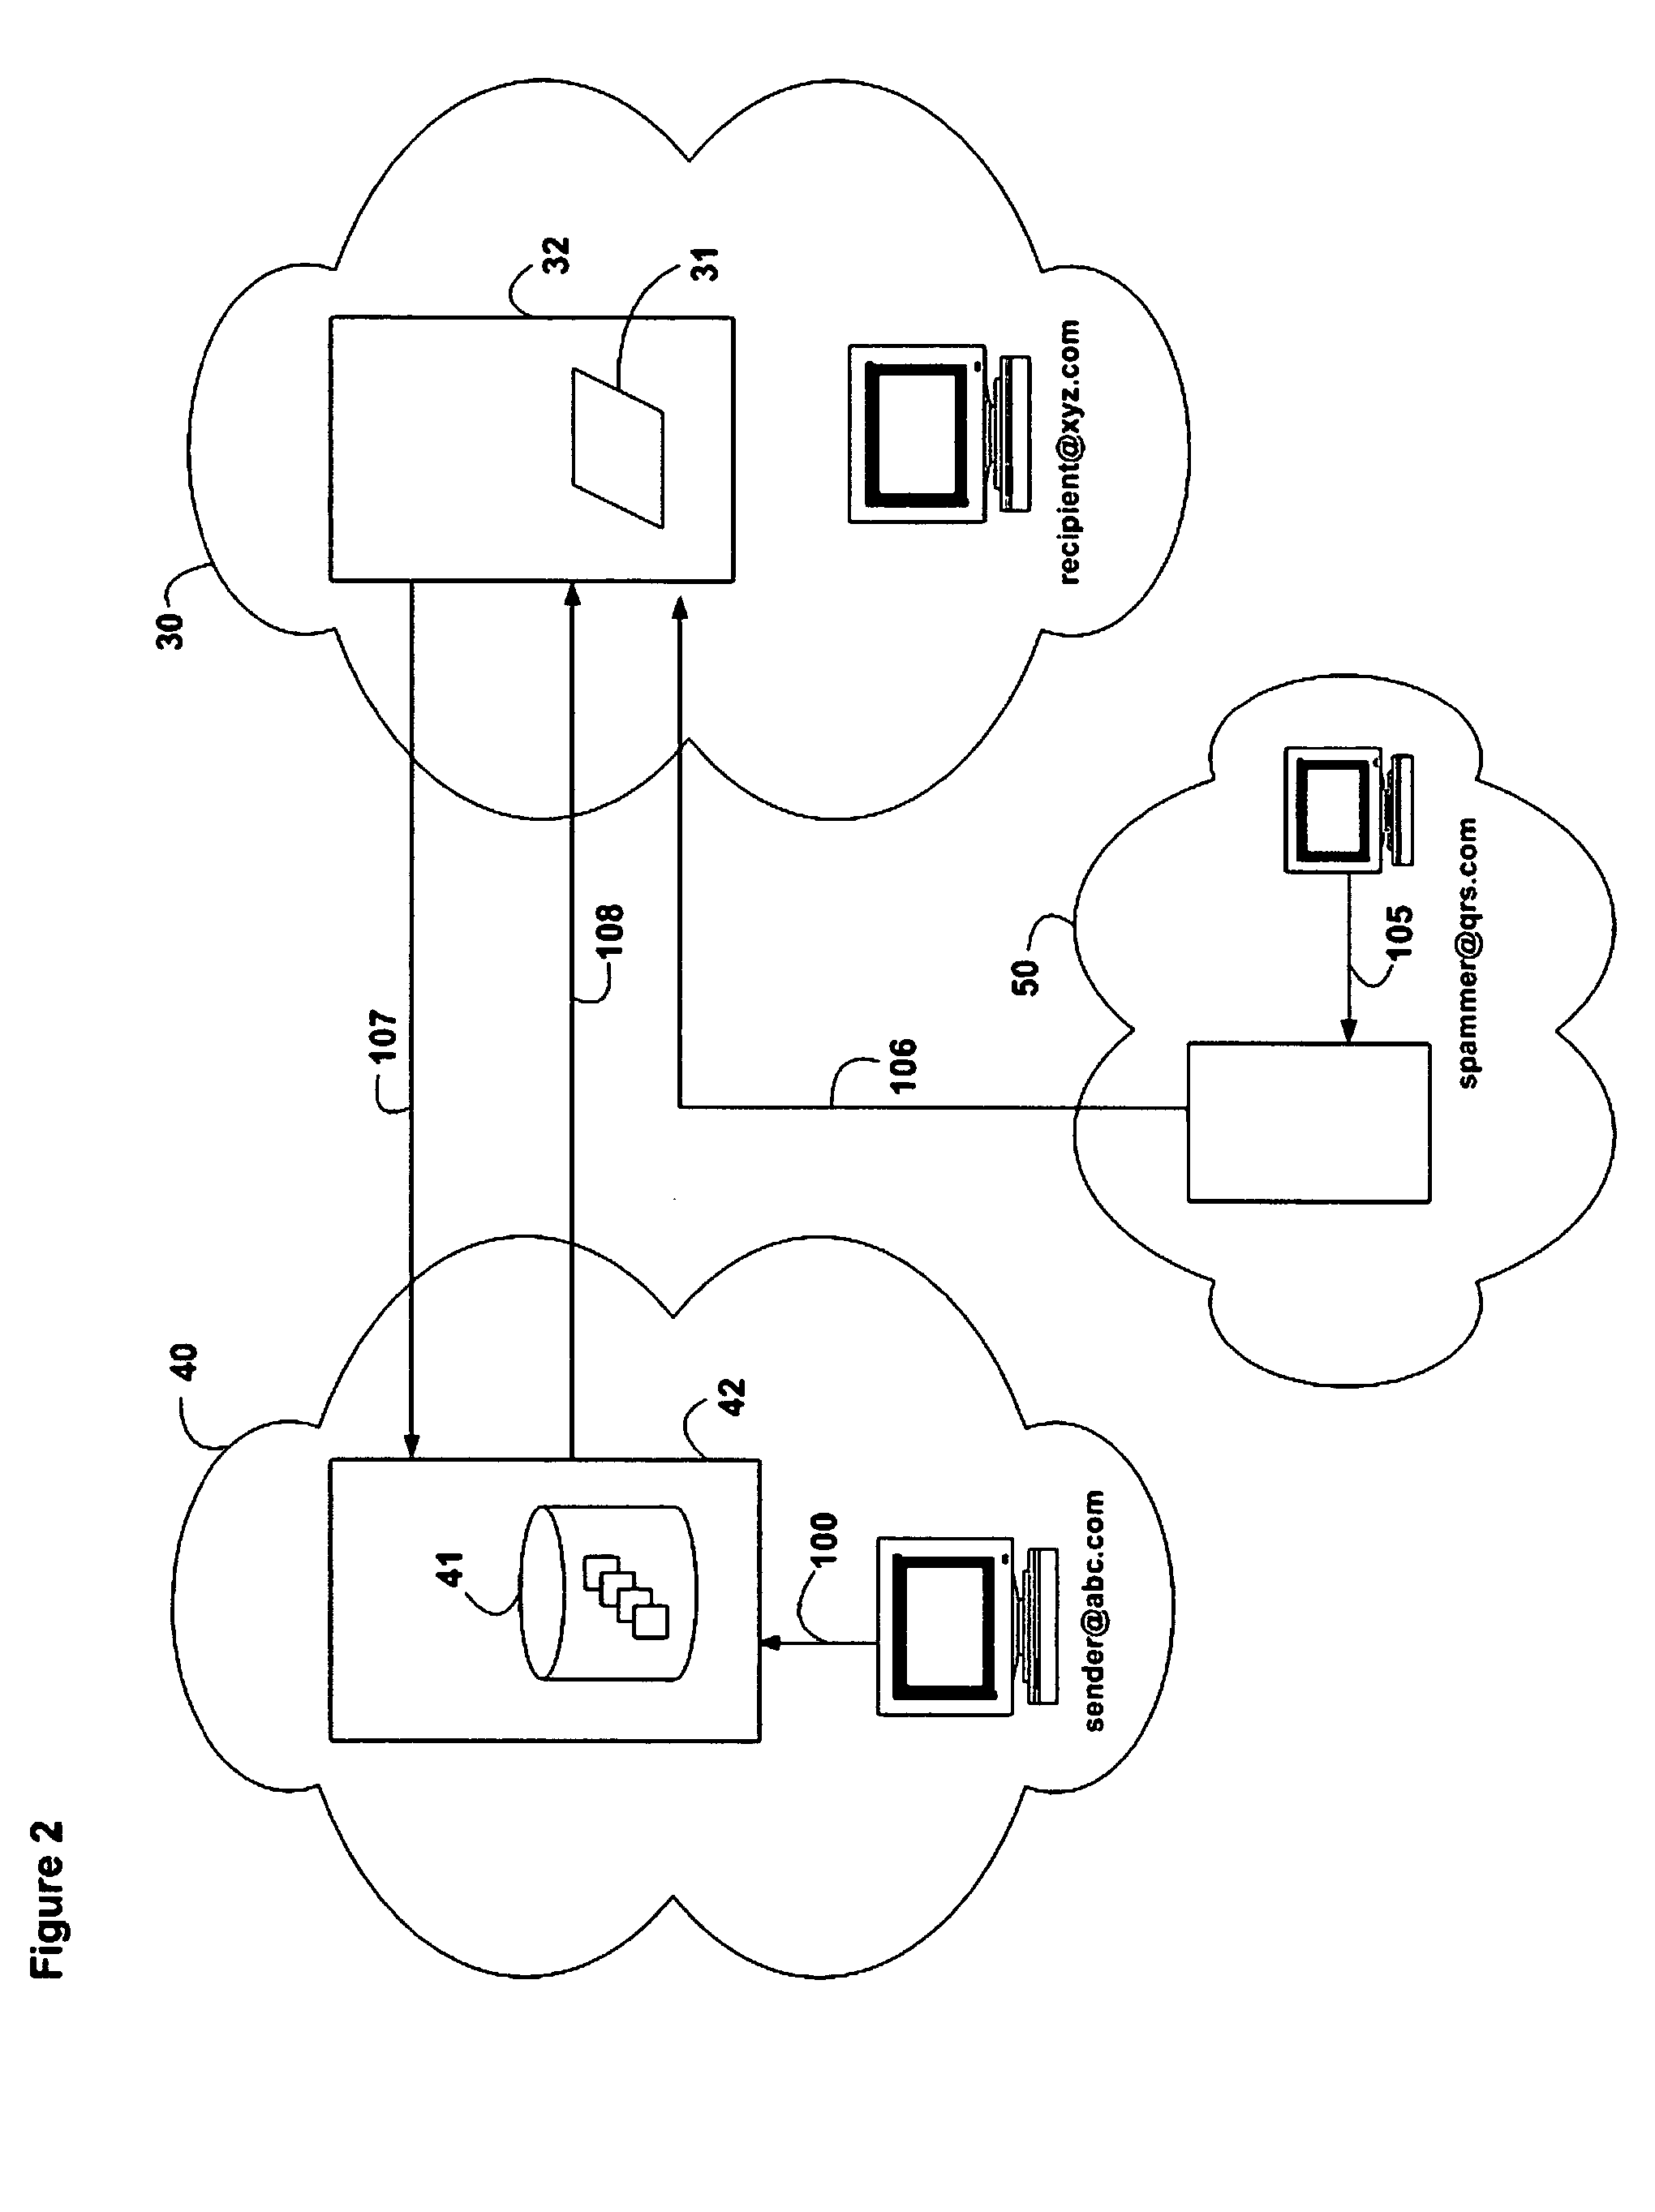 System and method for detecting and filtering unsolicited and undesired electronic messages